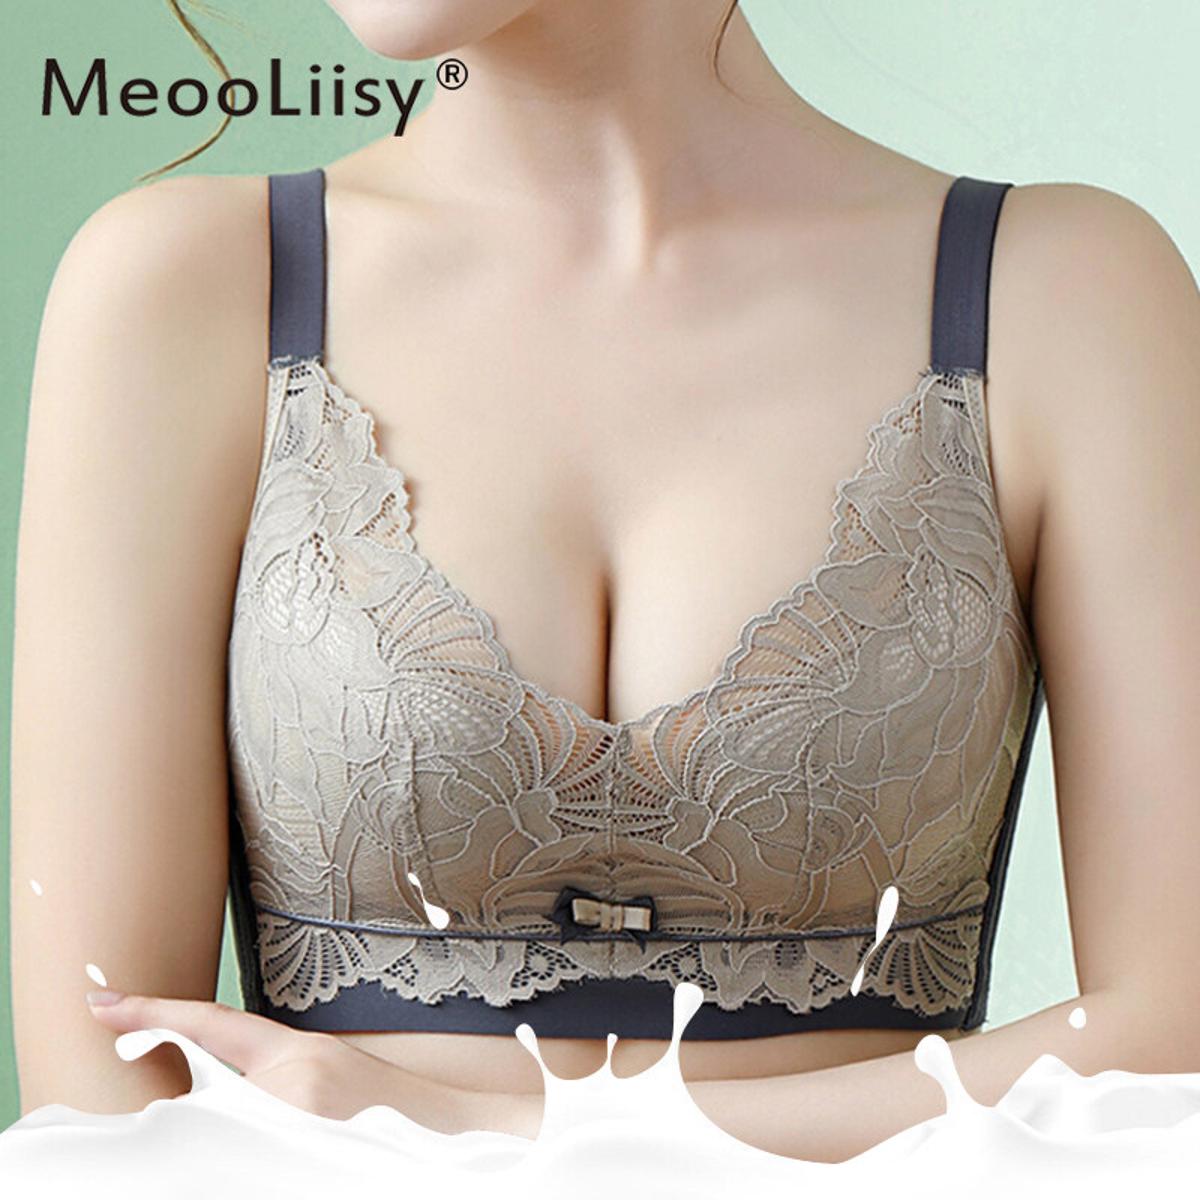 FallSweet Plus Size Push Up Bra Lace Underwear for women Thin Cup